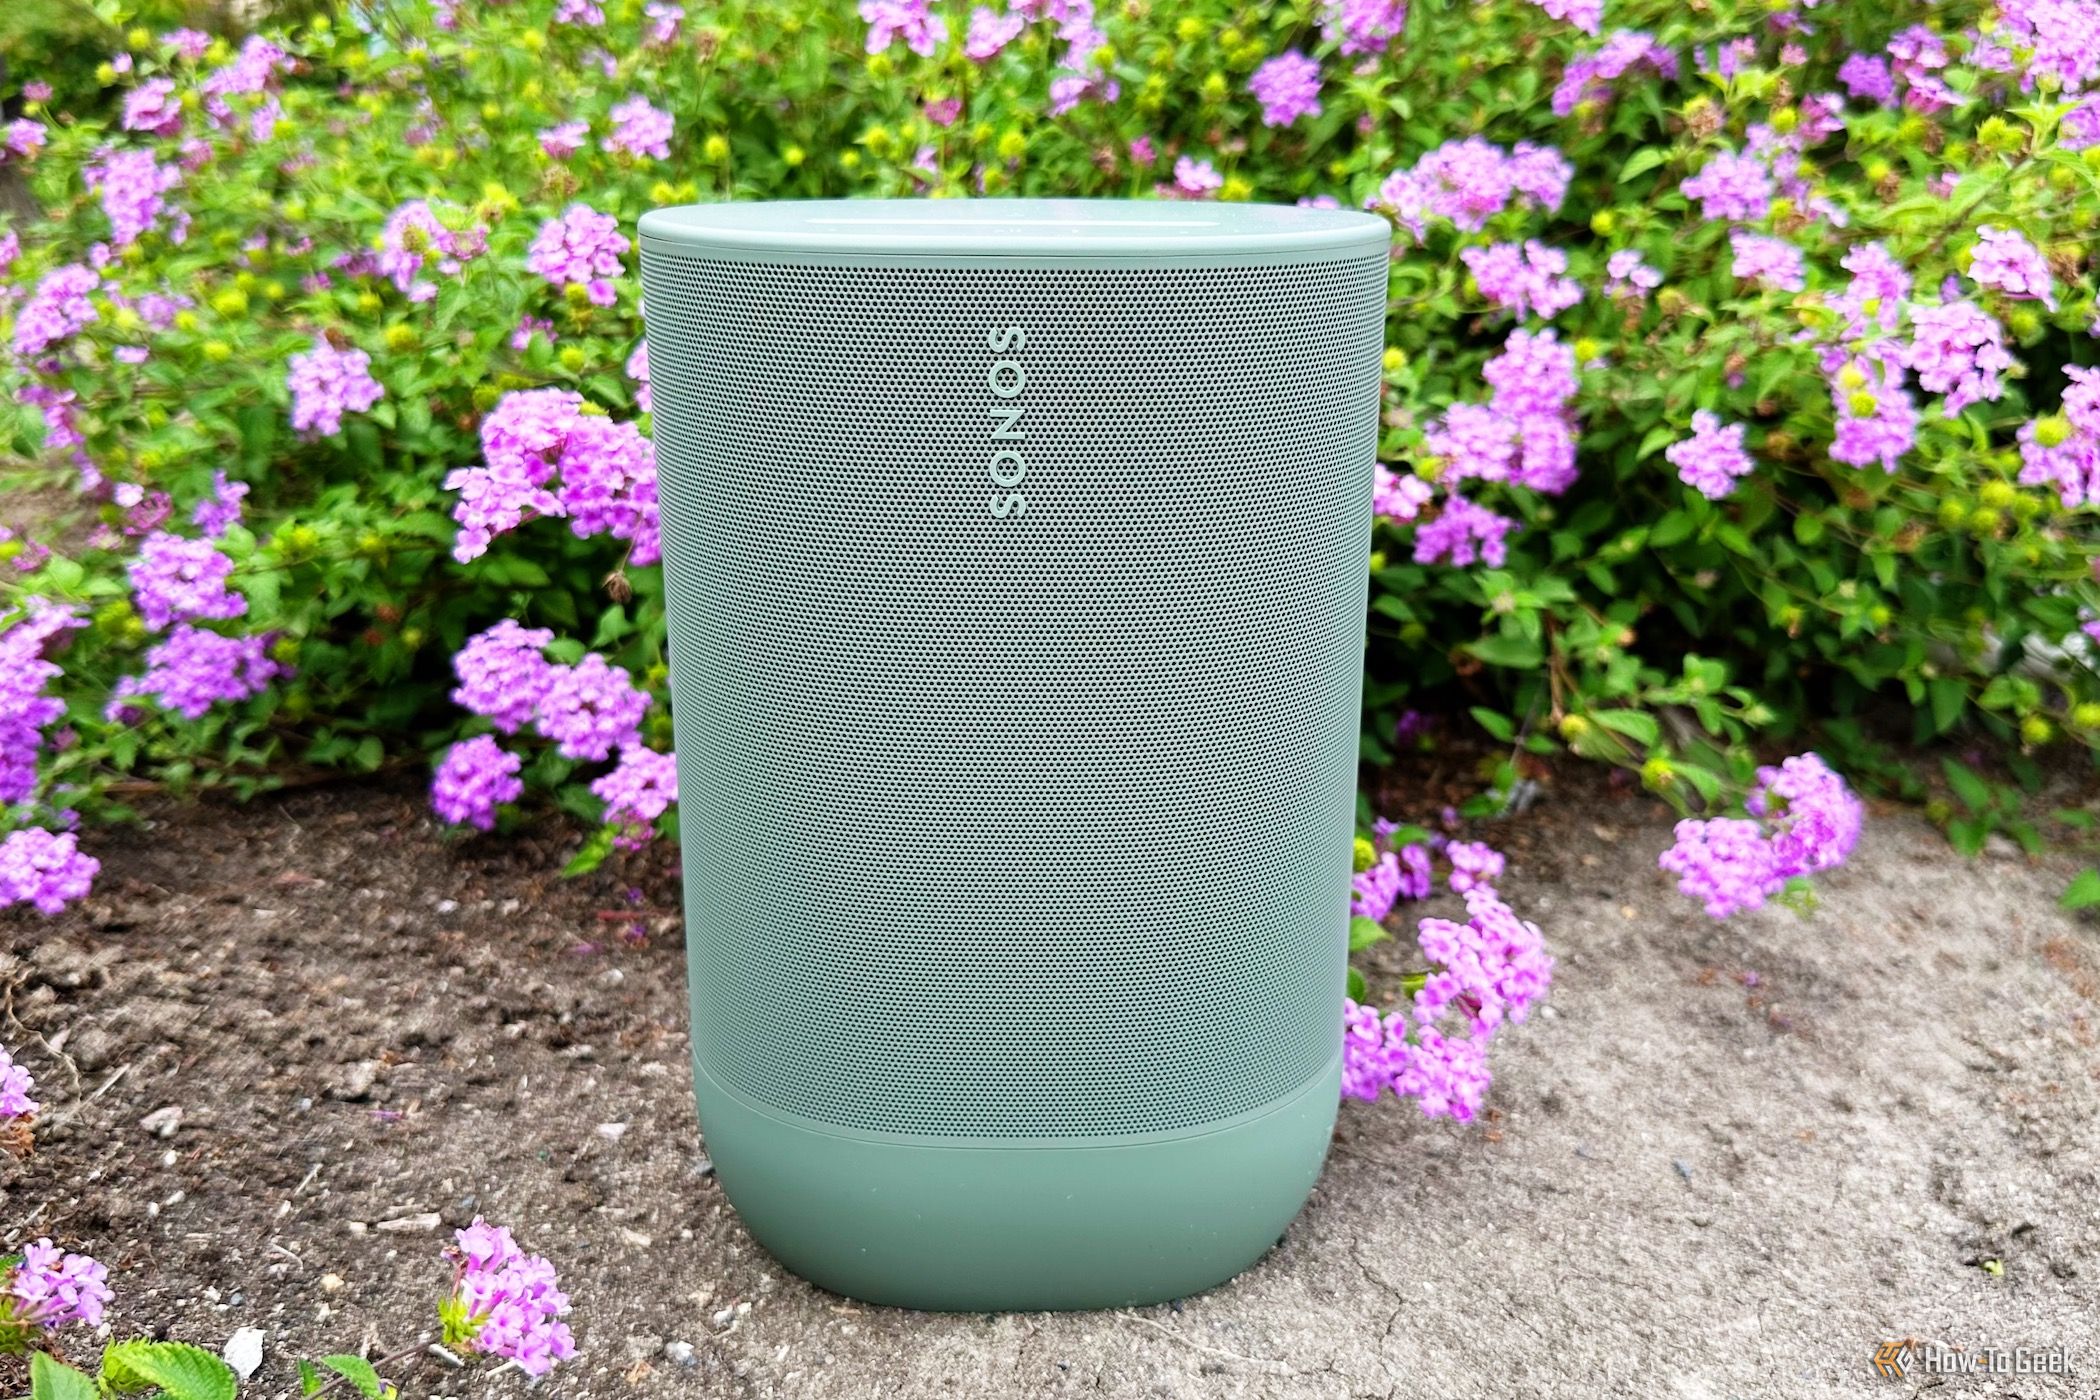 Sonos Move 2 sitting on a dirt patch in front of flowers